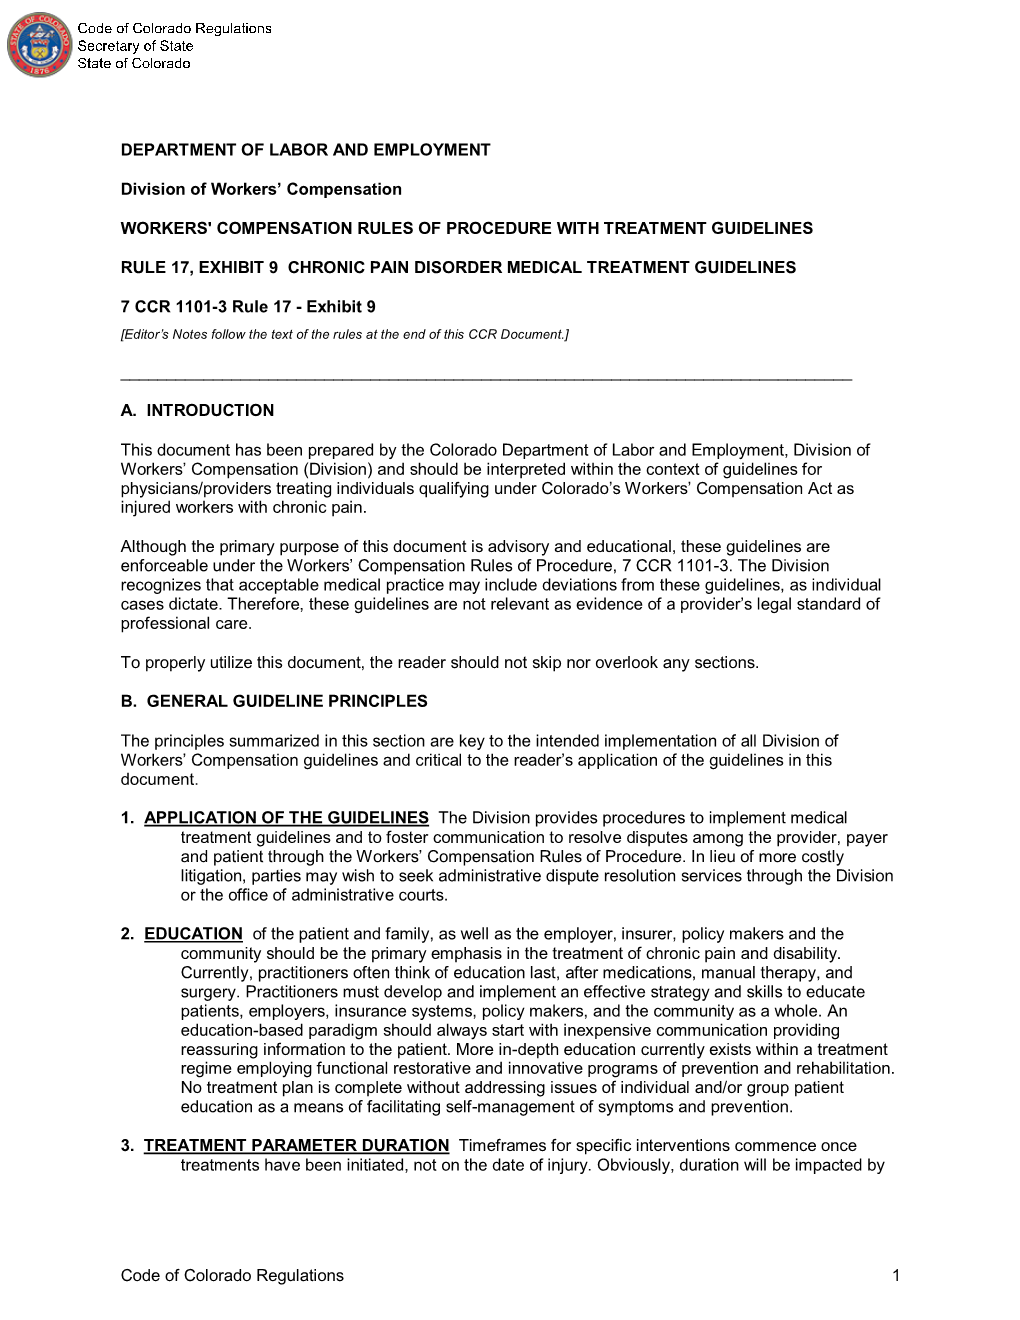 Code of Colorado Regulations 1 Patient Compliance, As Well As Availability of Services